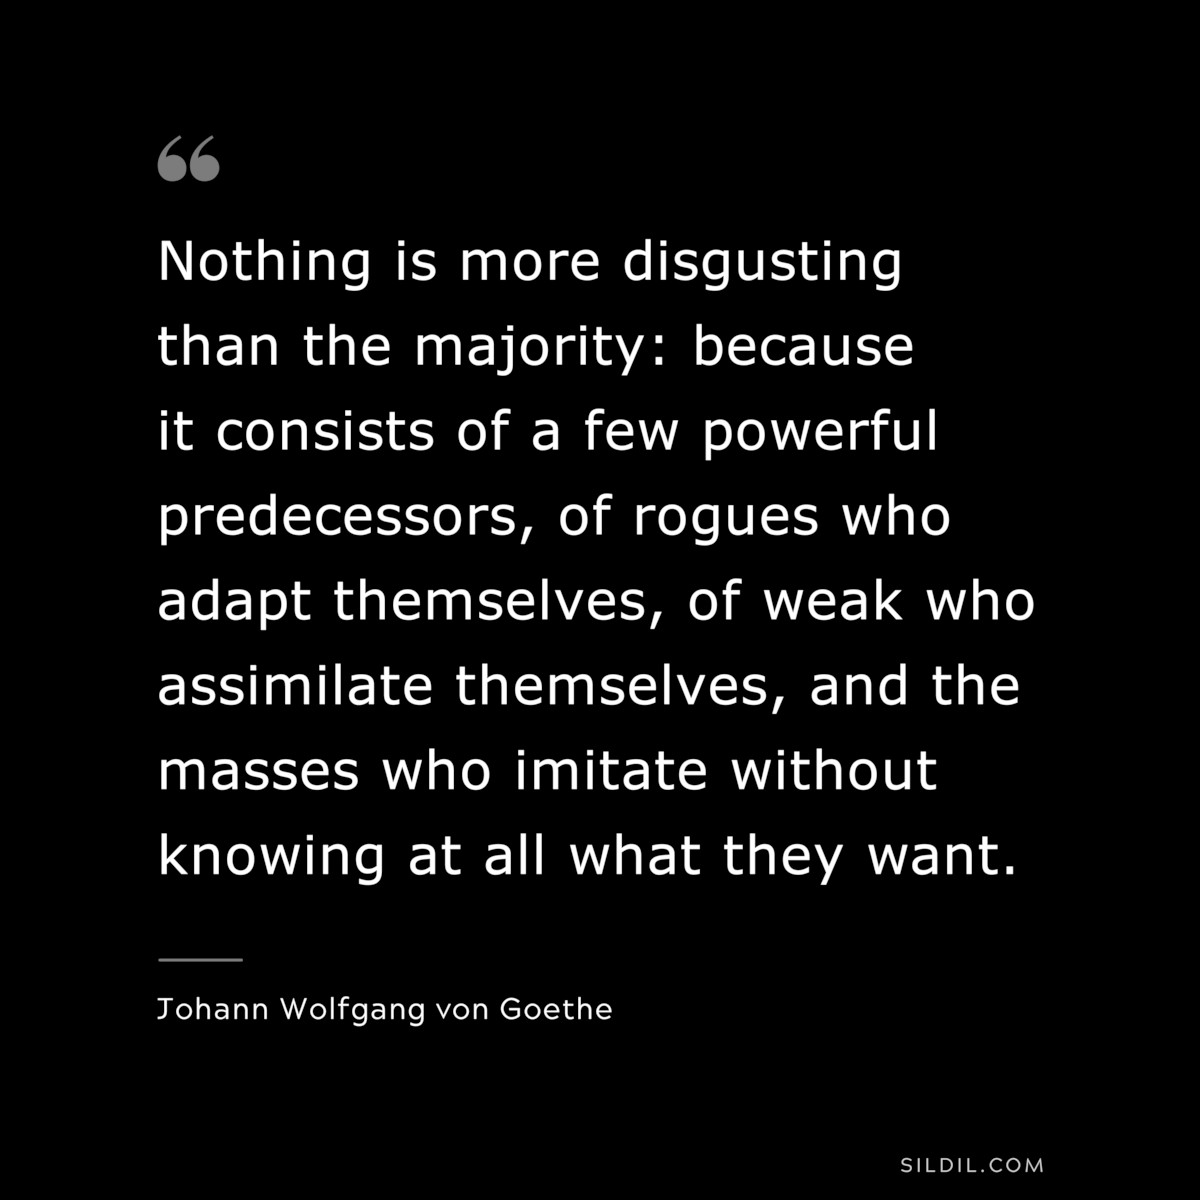 Nothing is more disgusting than the majority: because it consists of a few powerful predecessors, of rogues who adapt themselves, of weak who assimilate themselves, and the masses who imitate without knowing at all what they want.― Johann Wolfgang von Goethe